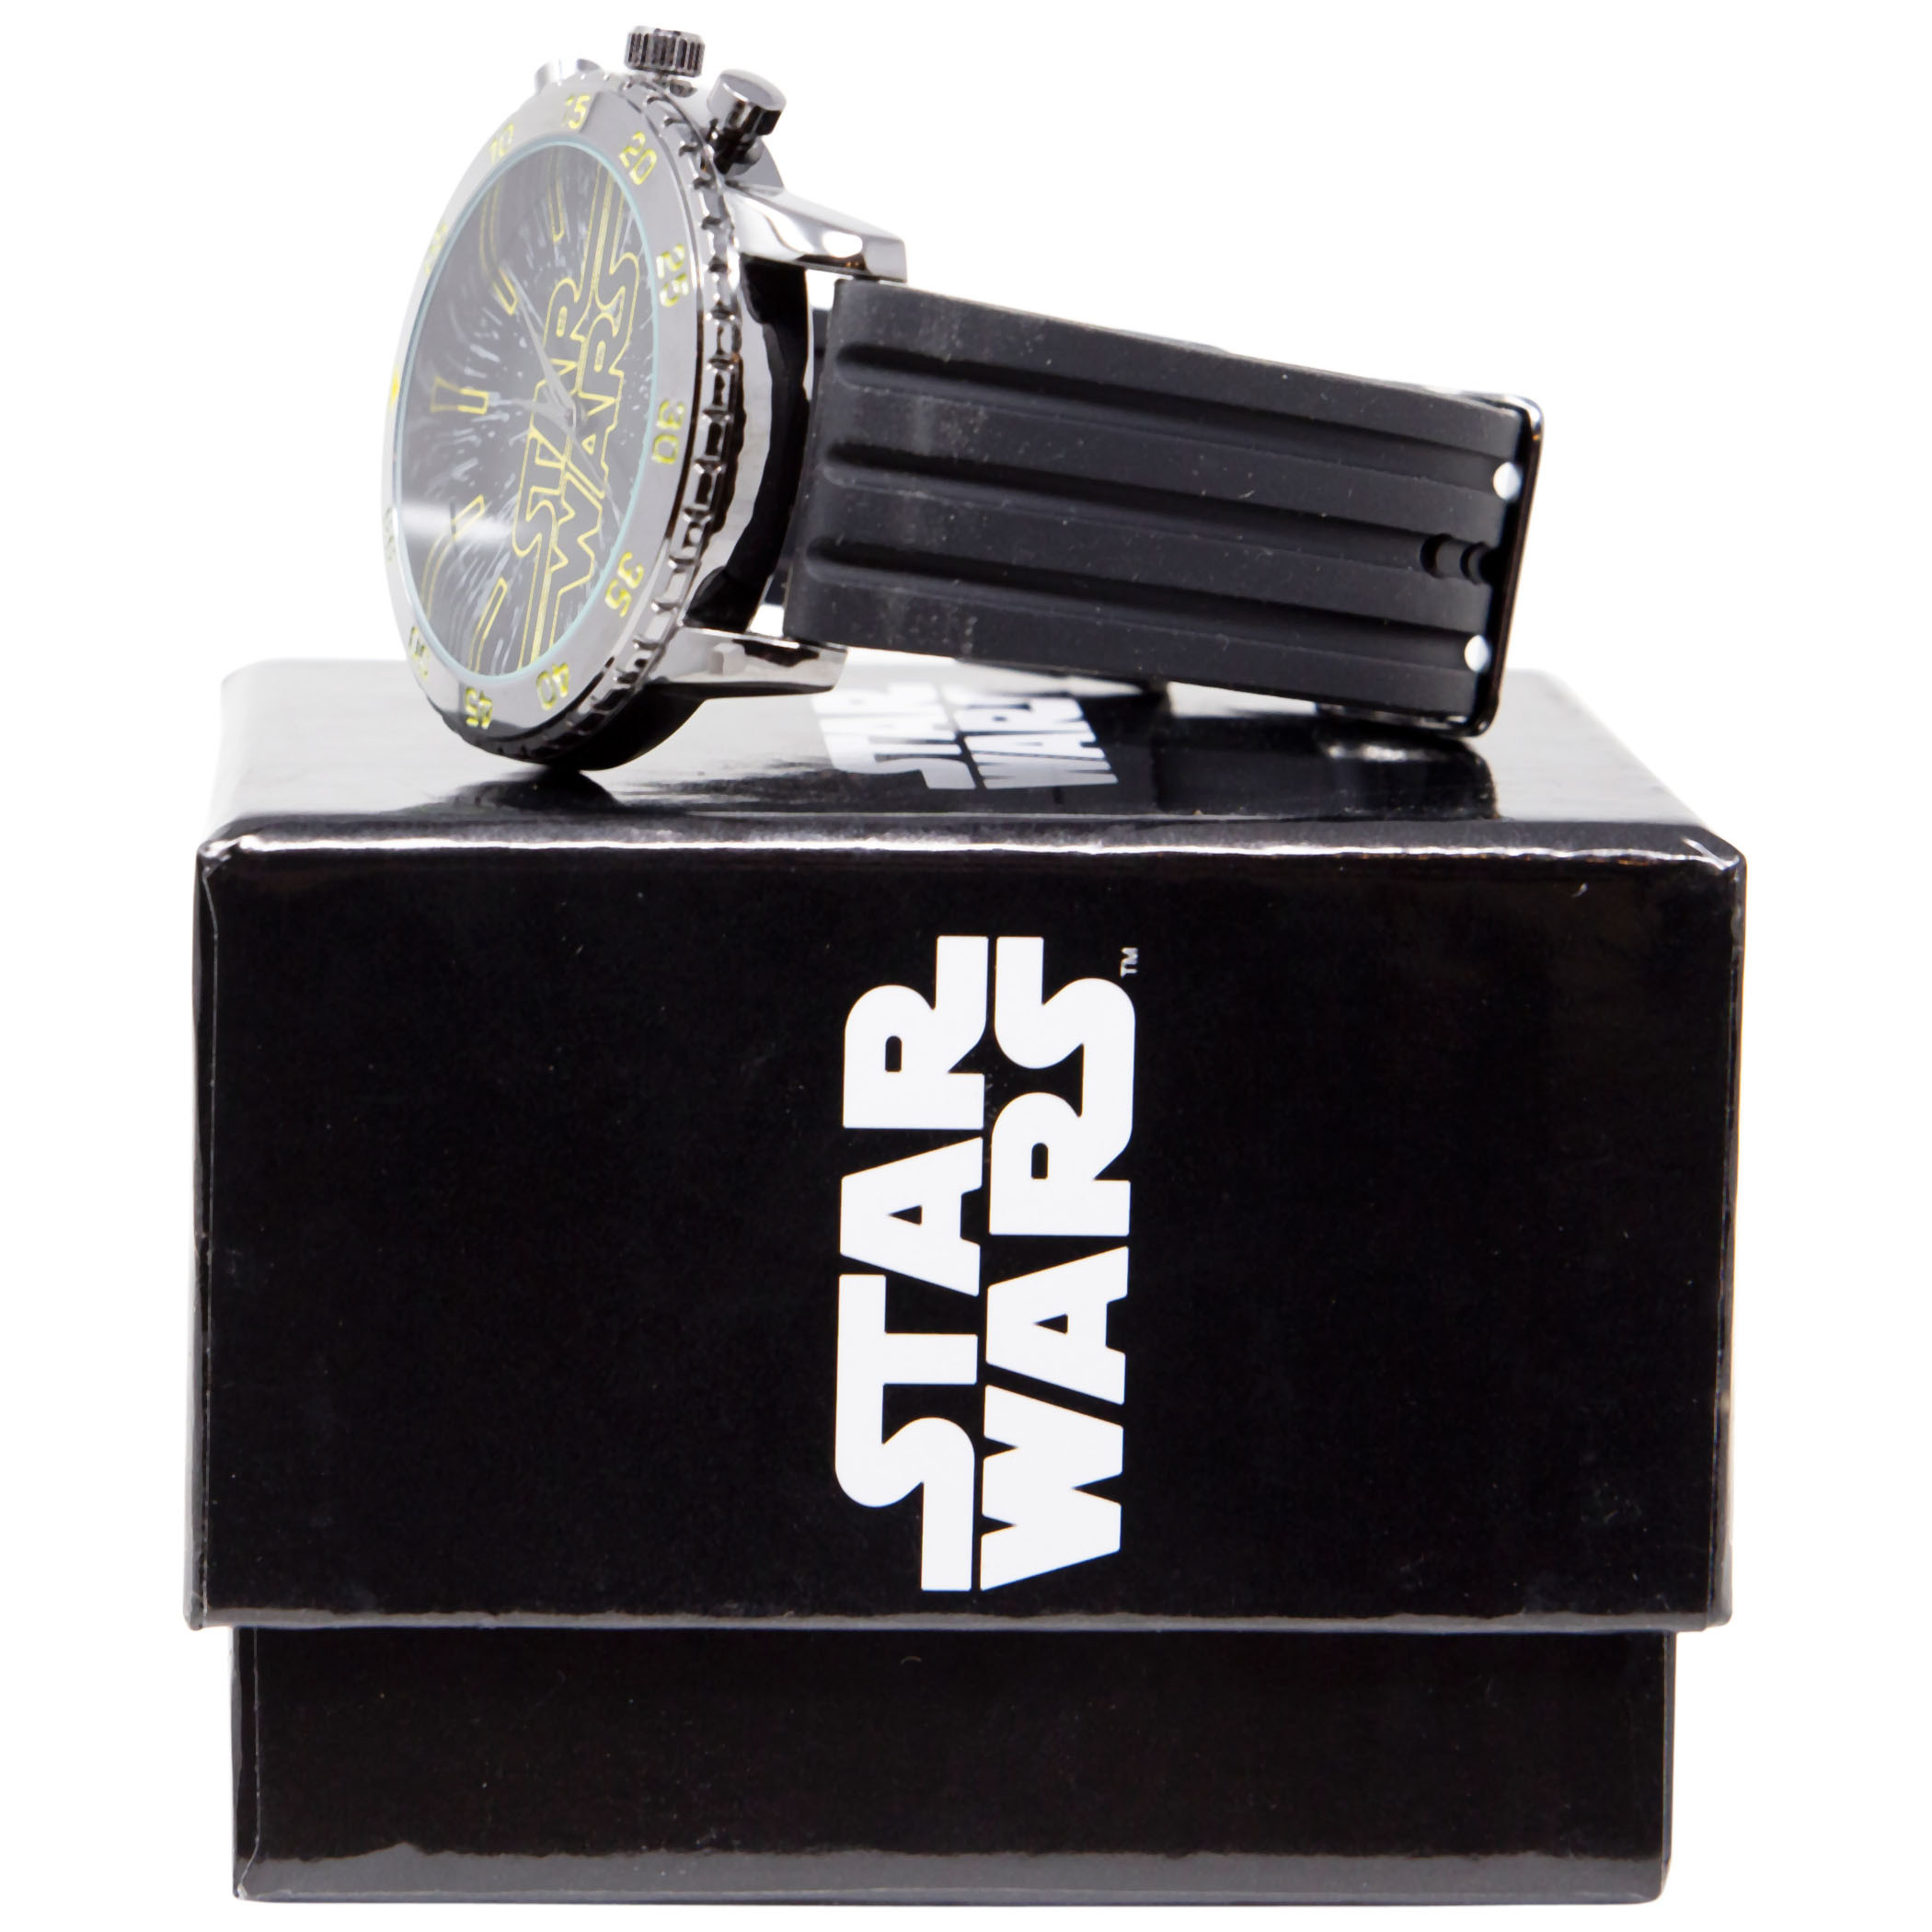 Star Wars Title Card Logo Classic Watch With Rubber Band